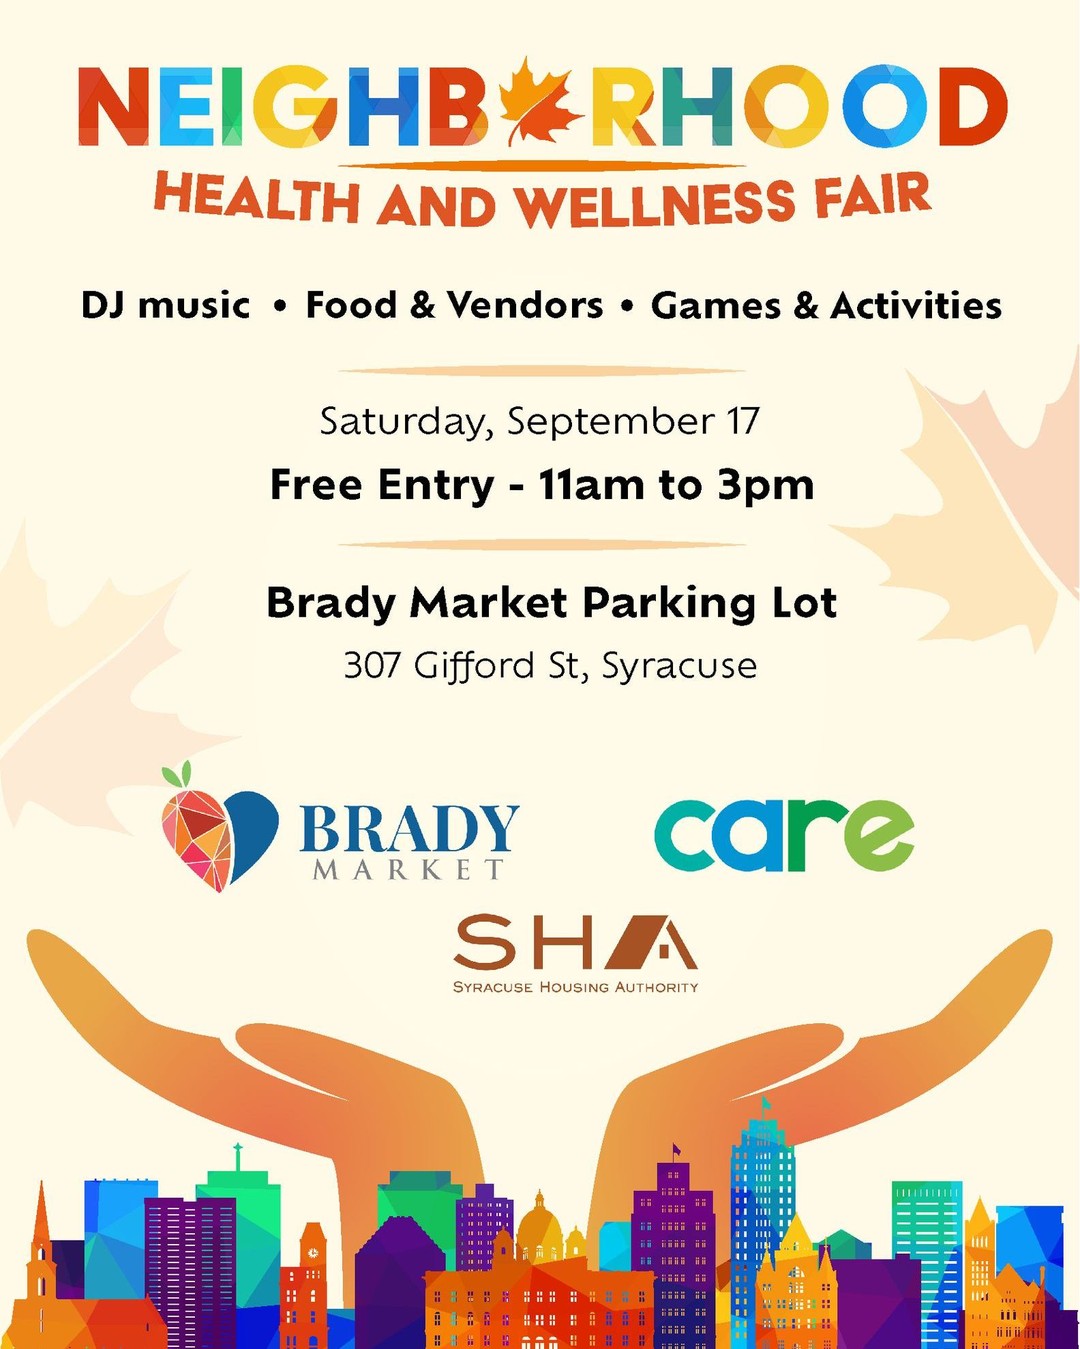 Join us for the Neighborhood Health and Wellness Fair, right here at Brady Market on Saturday, September 17! We'll see you there!
#morethanamarket